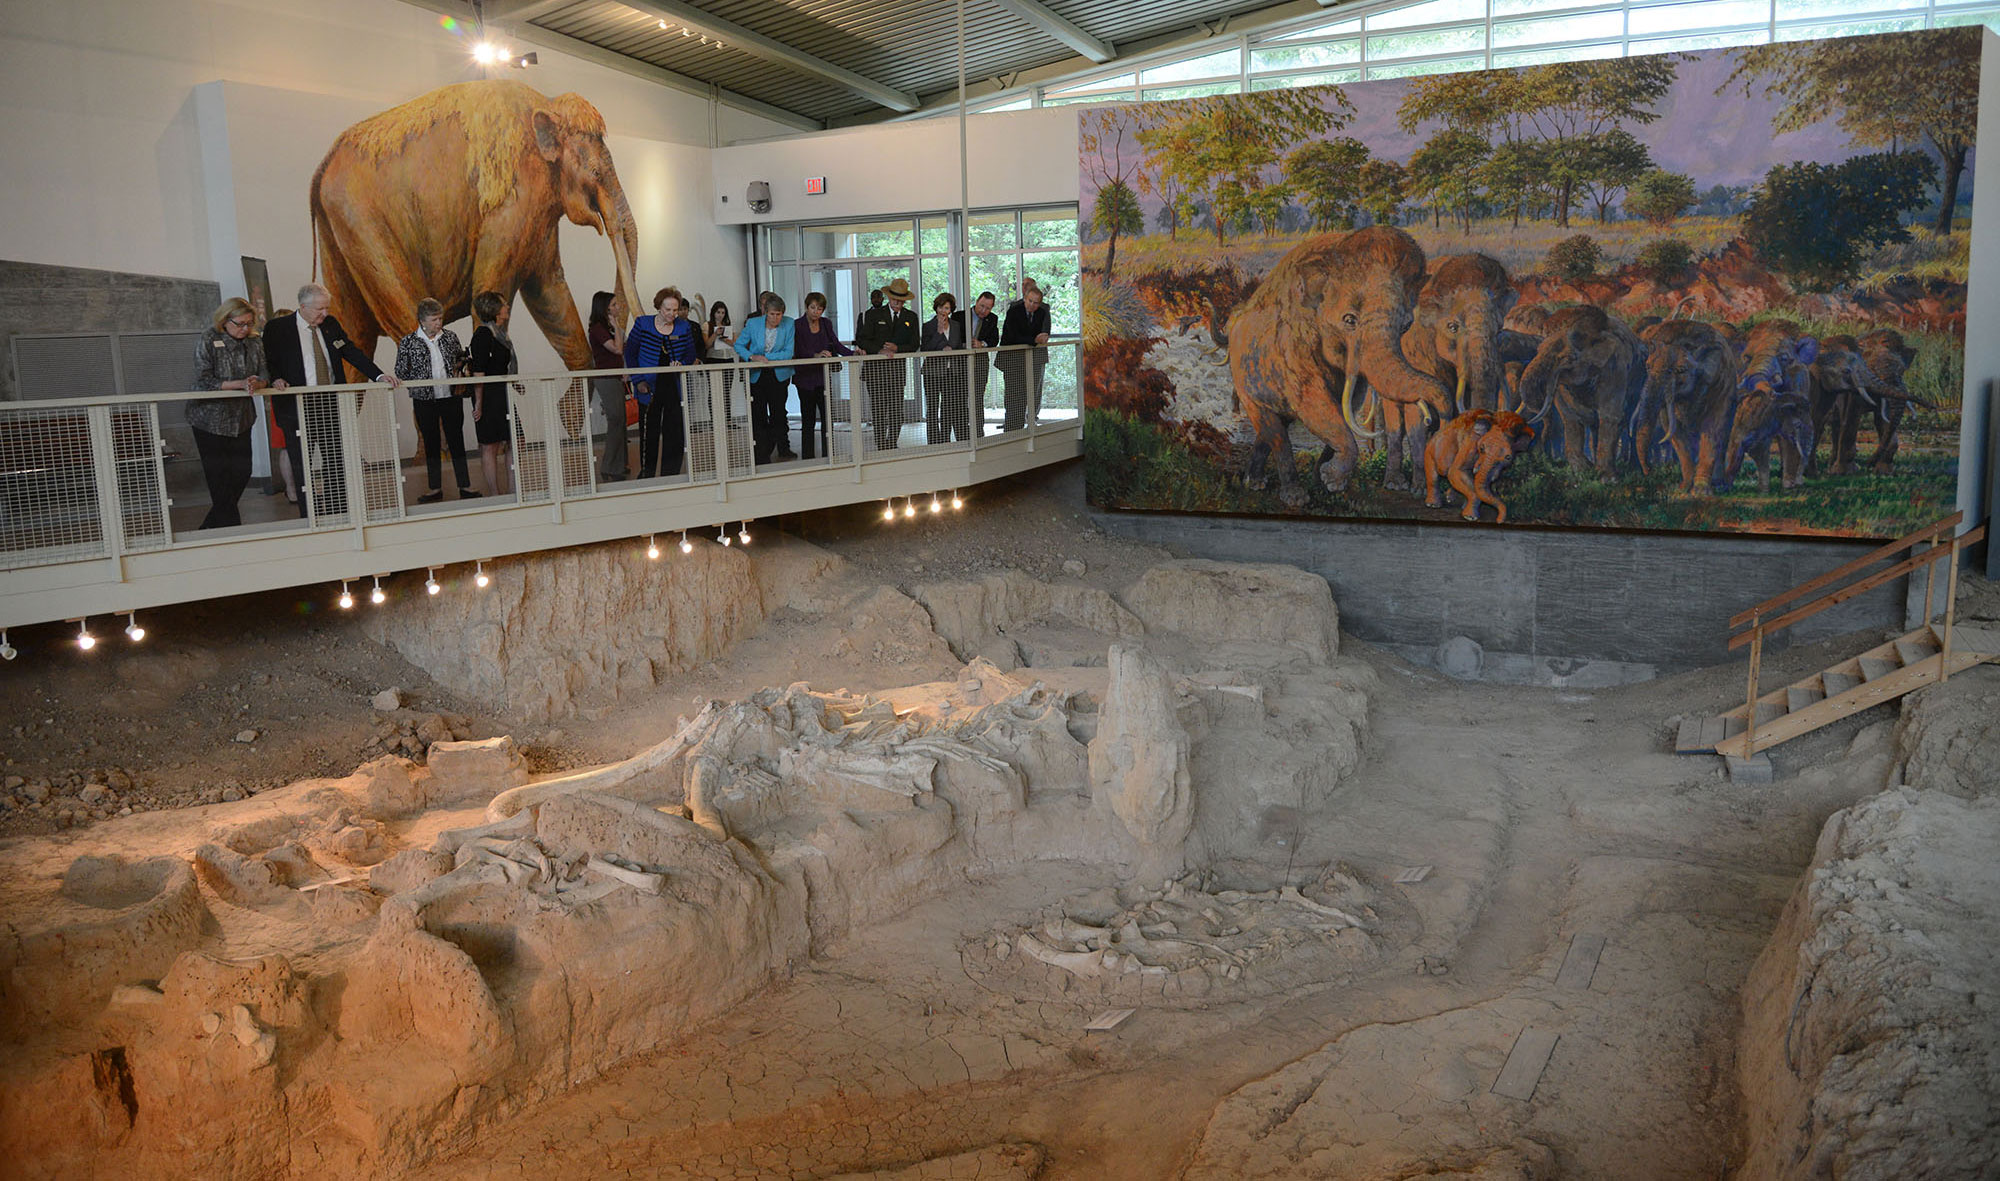 Photo inside the shelter at Waco Mammoth National Monument with a group of people on an walkway looking down on partially excavated mammals skeletons.